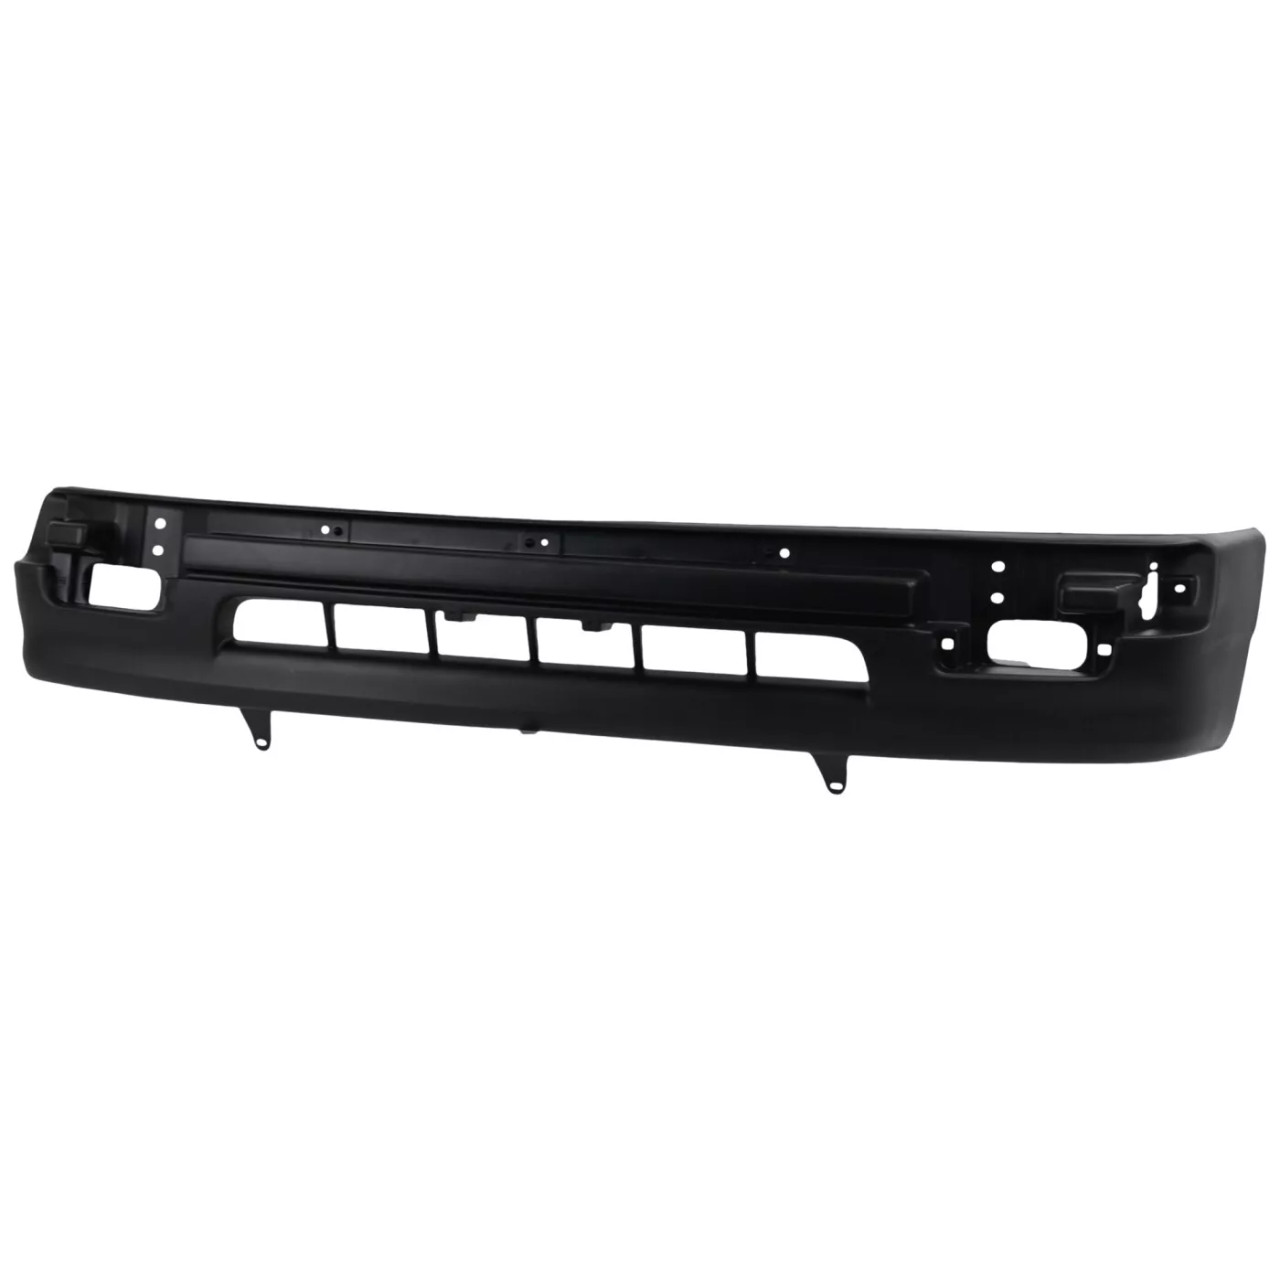 Bumper Cover Kit For 1998-2000 Toyota Tacoma